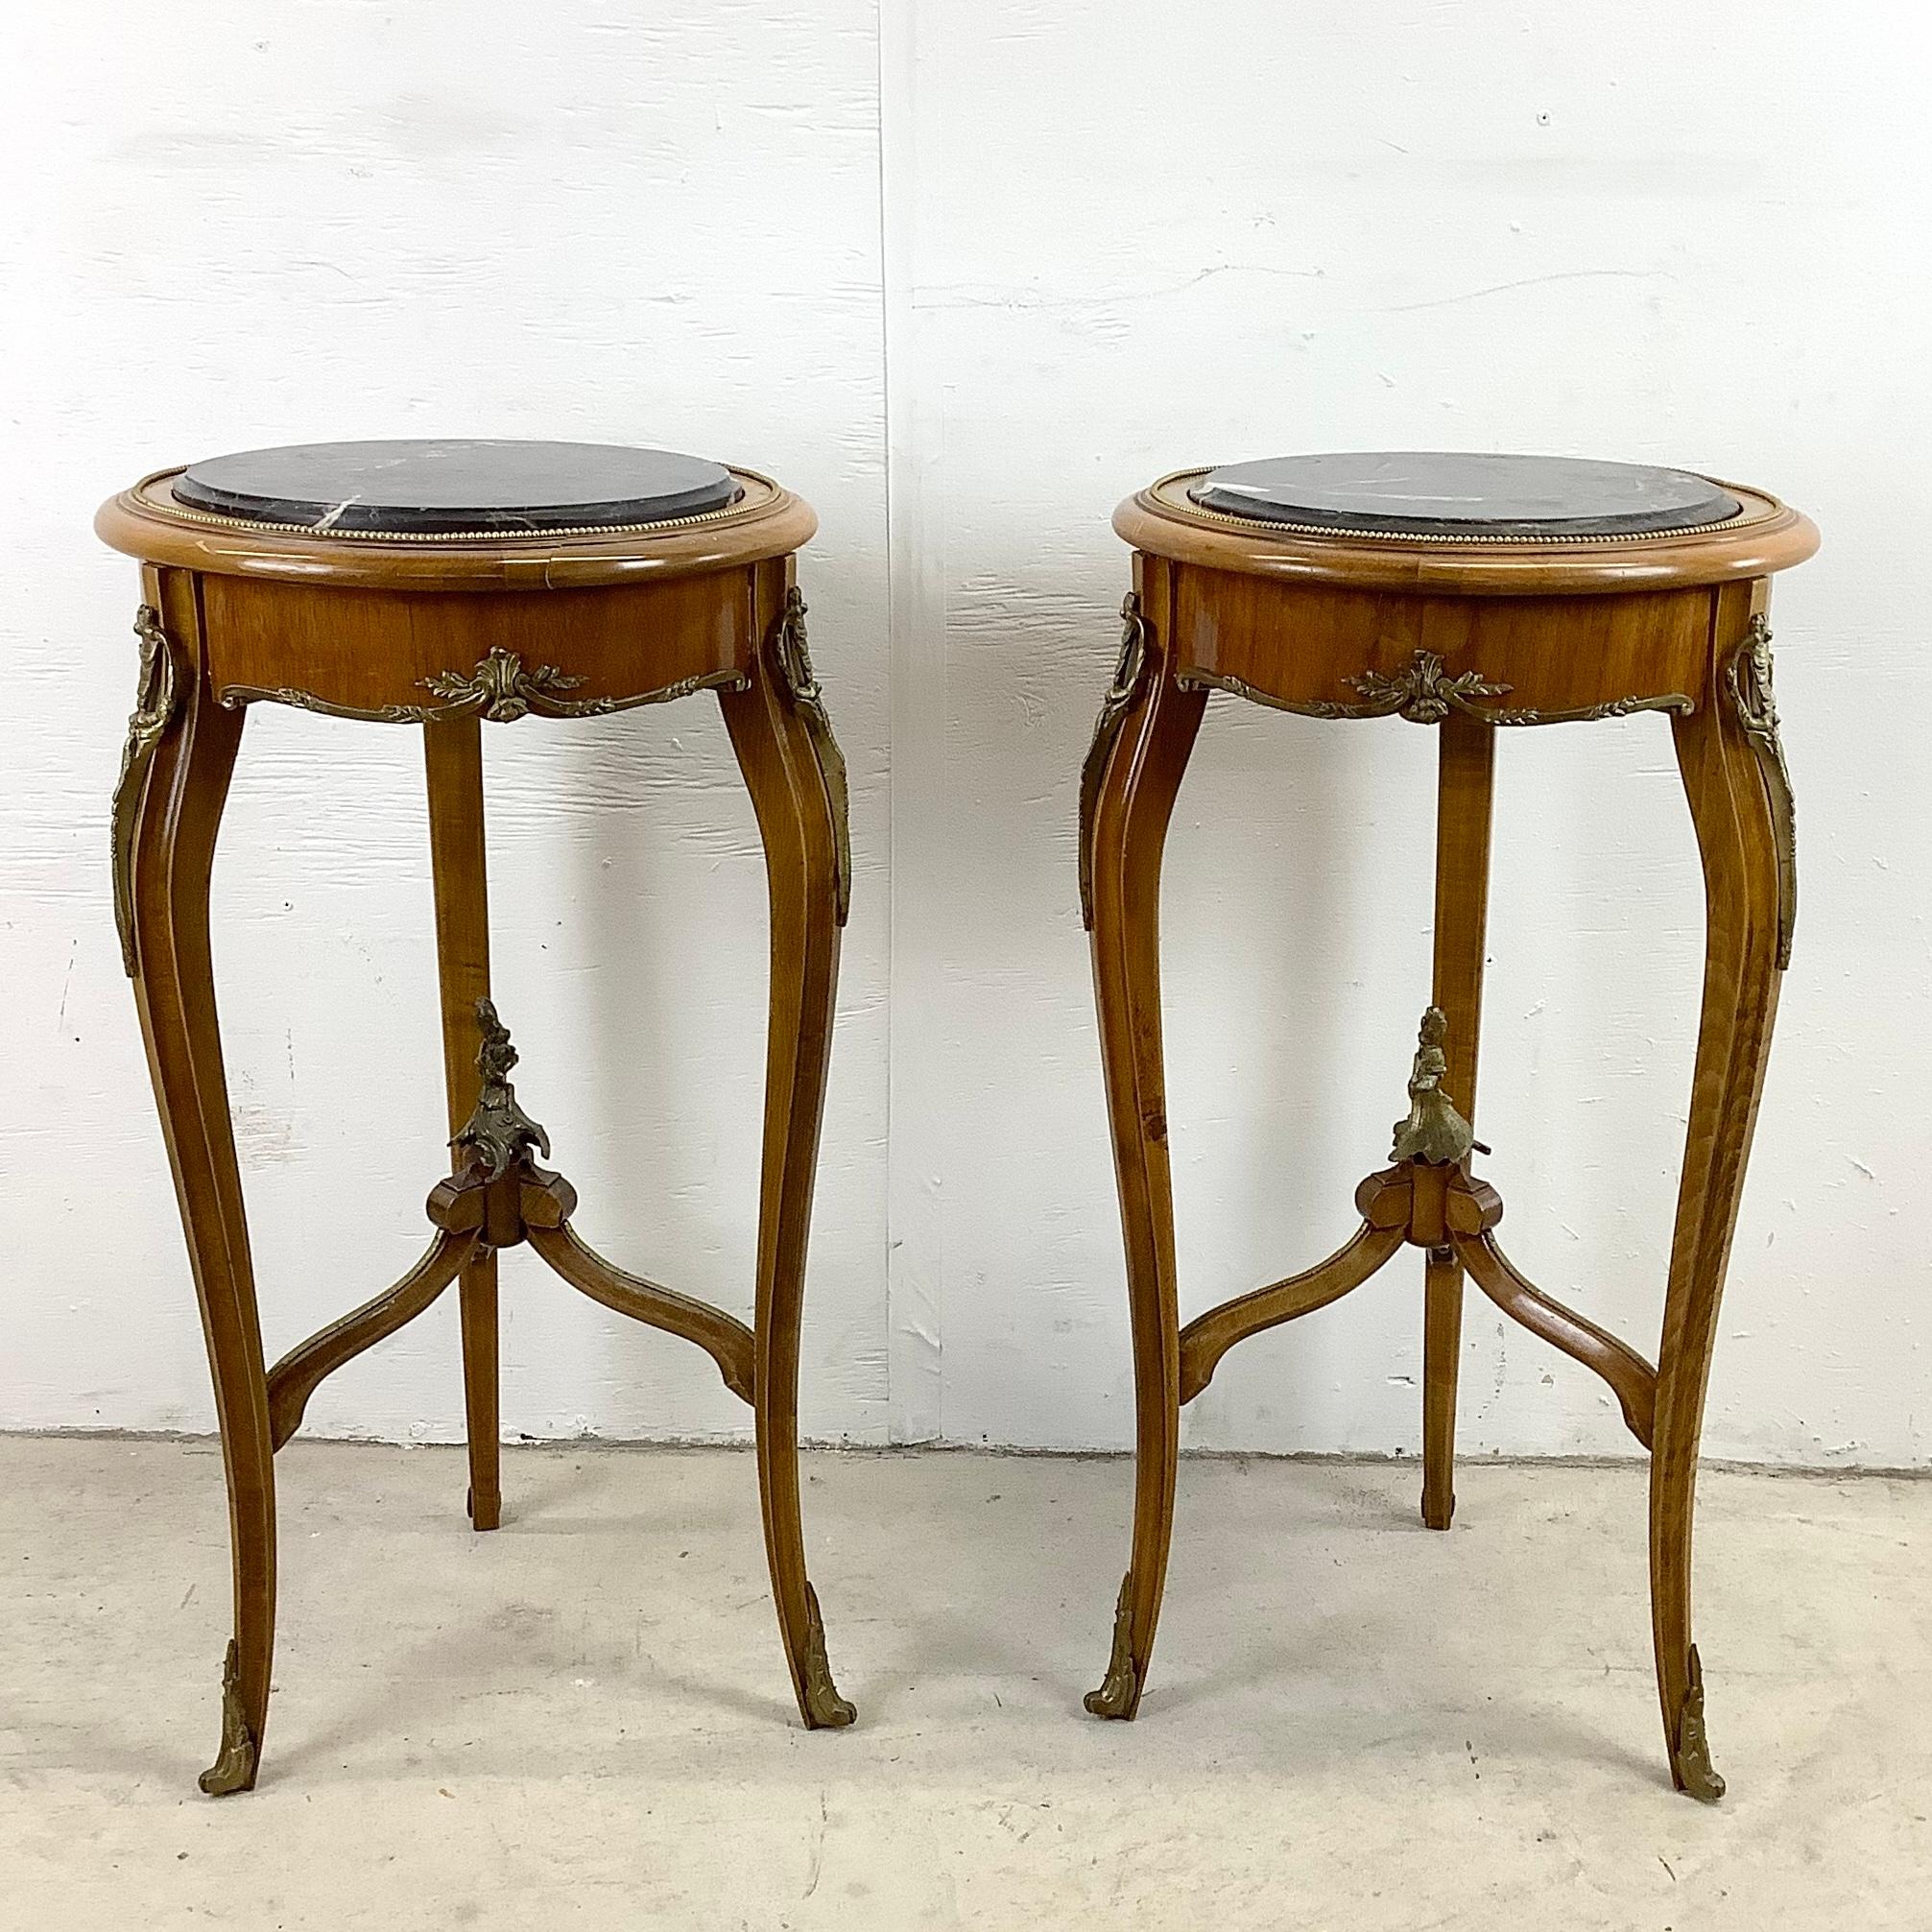 This unique pair of vintage French Louis XV style end tables feature ornate tapered legs with ornate brass finish finial and marbelized black stone table tops. Perfect accent tables for use a display pedestals, lamp stands, or plant stands. Unique